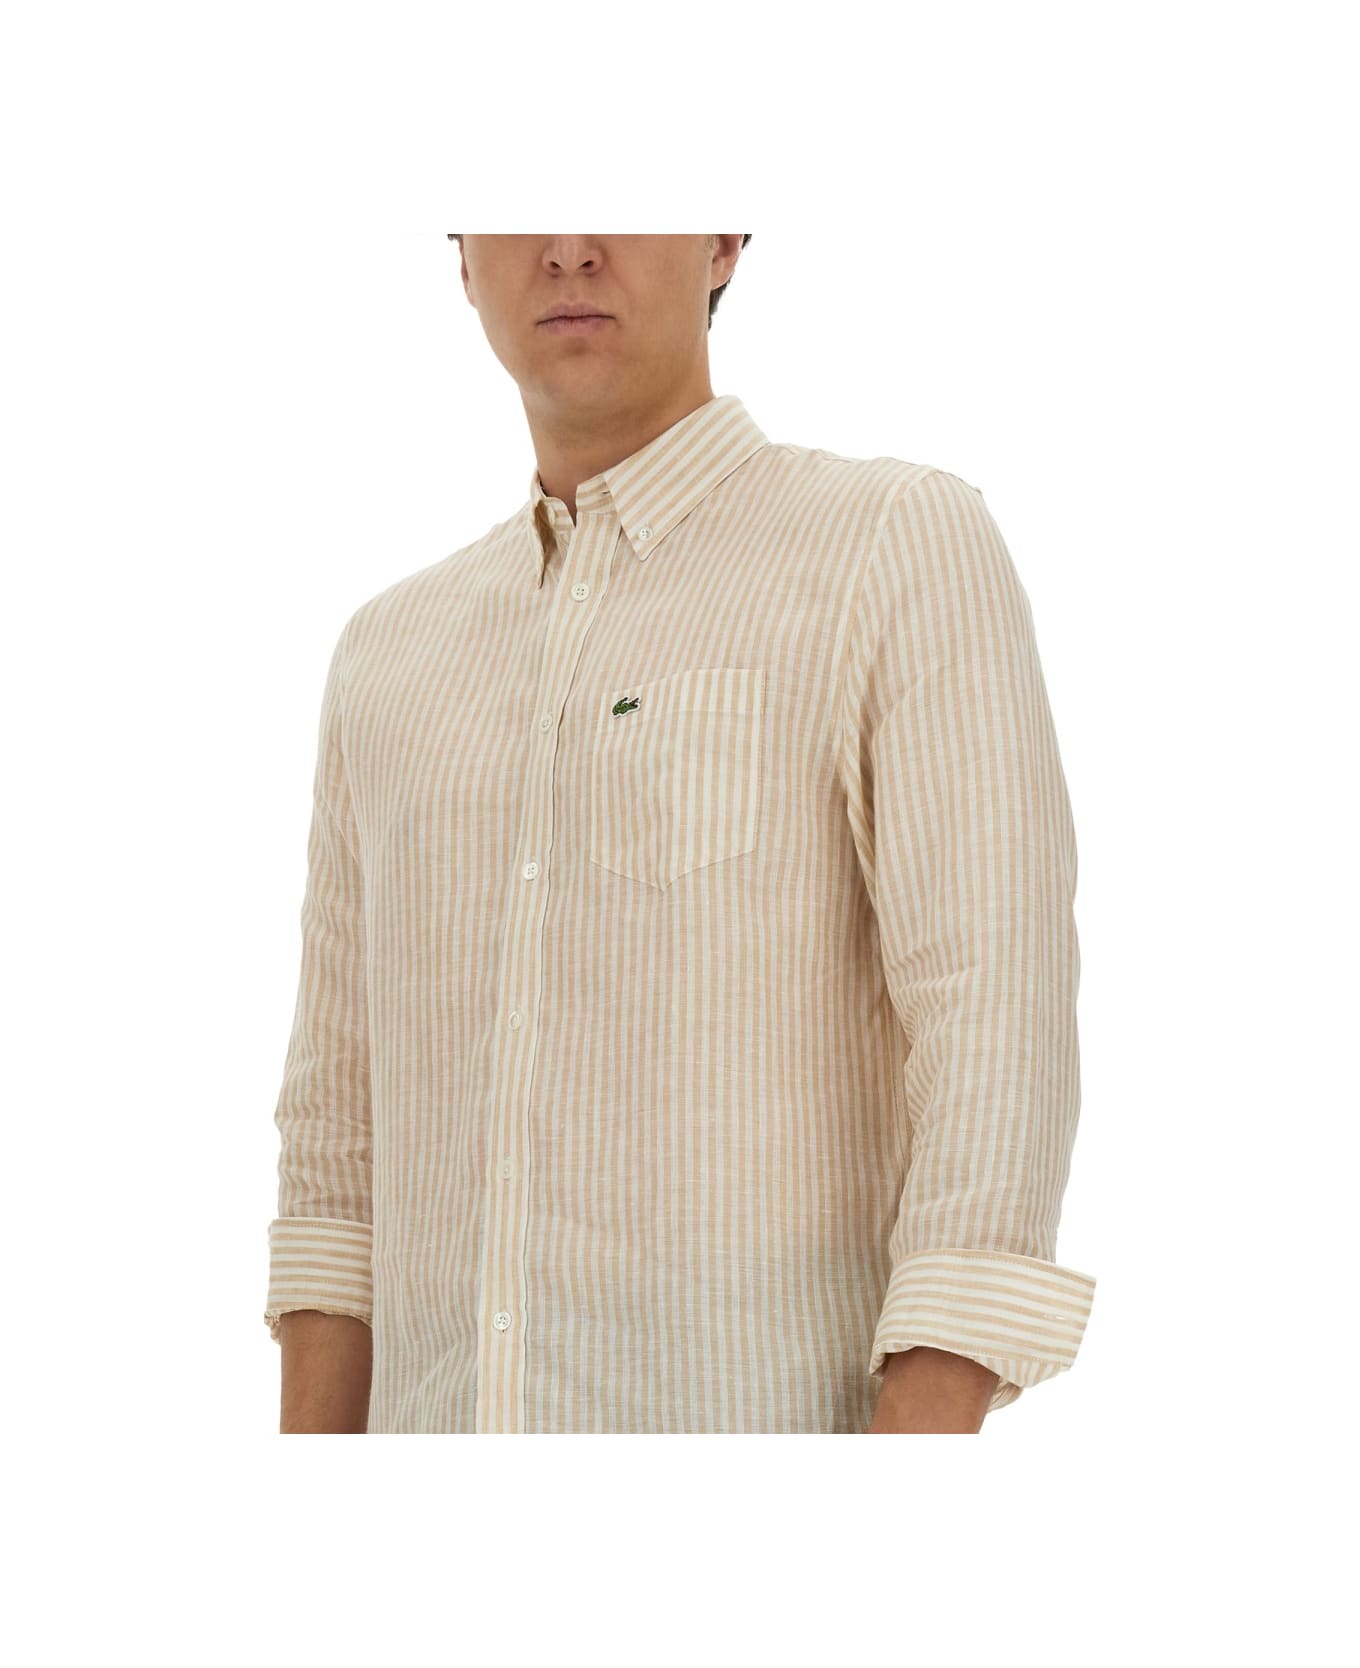 Lacoste Shirt With Logo - BEIGE